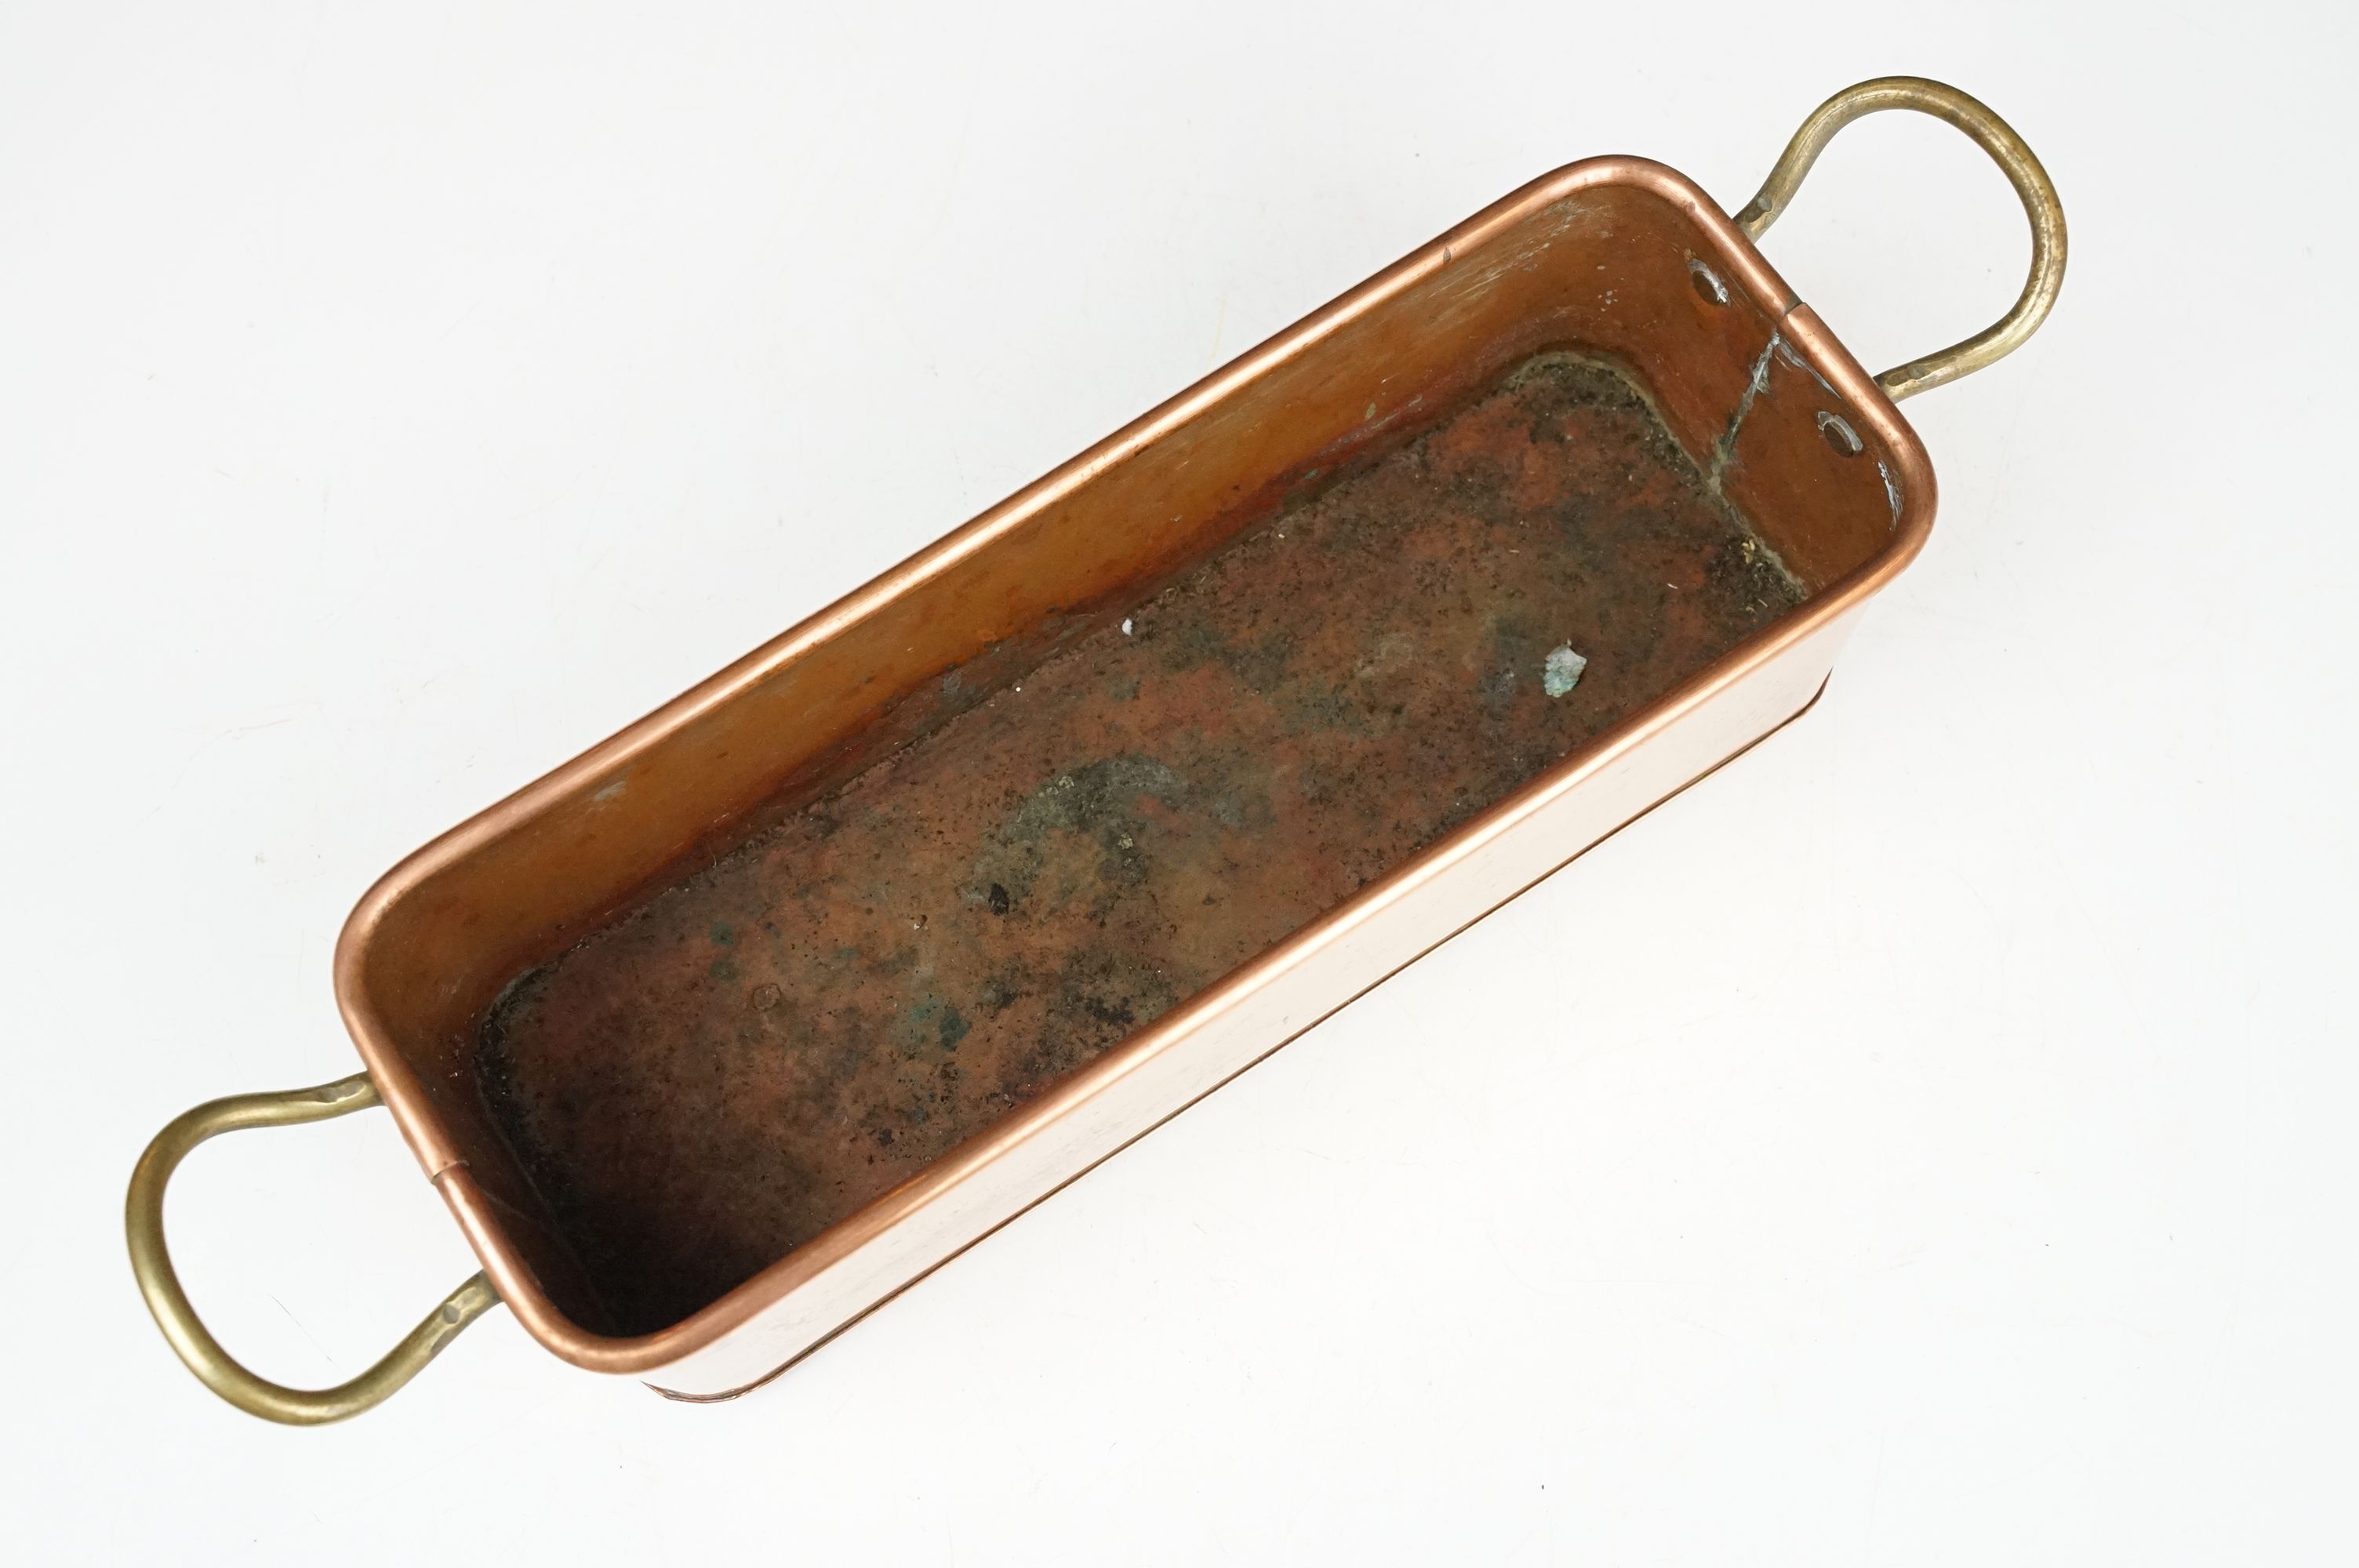 Copper Rectangular Planter with rolled rim and two brass loop handles, 39cm long - Image 3 of 5